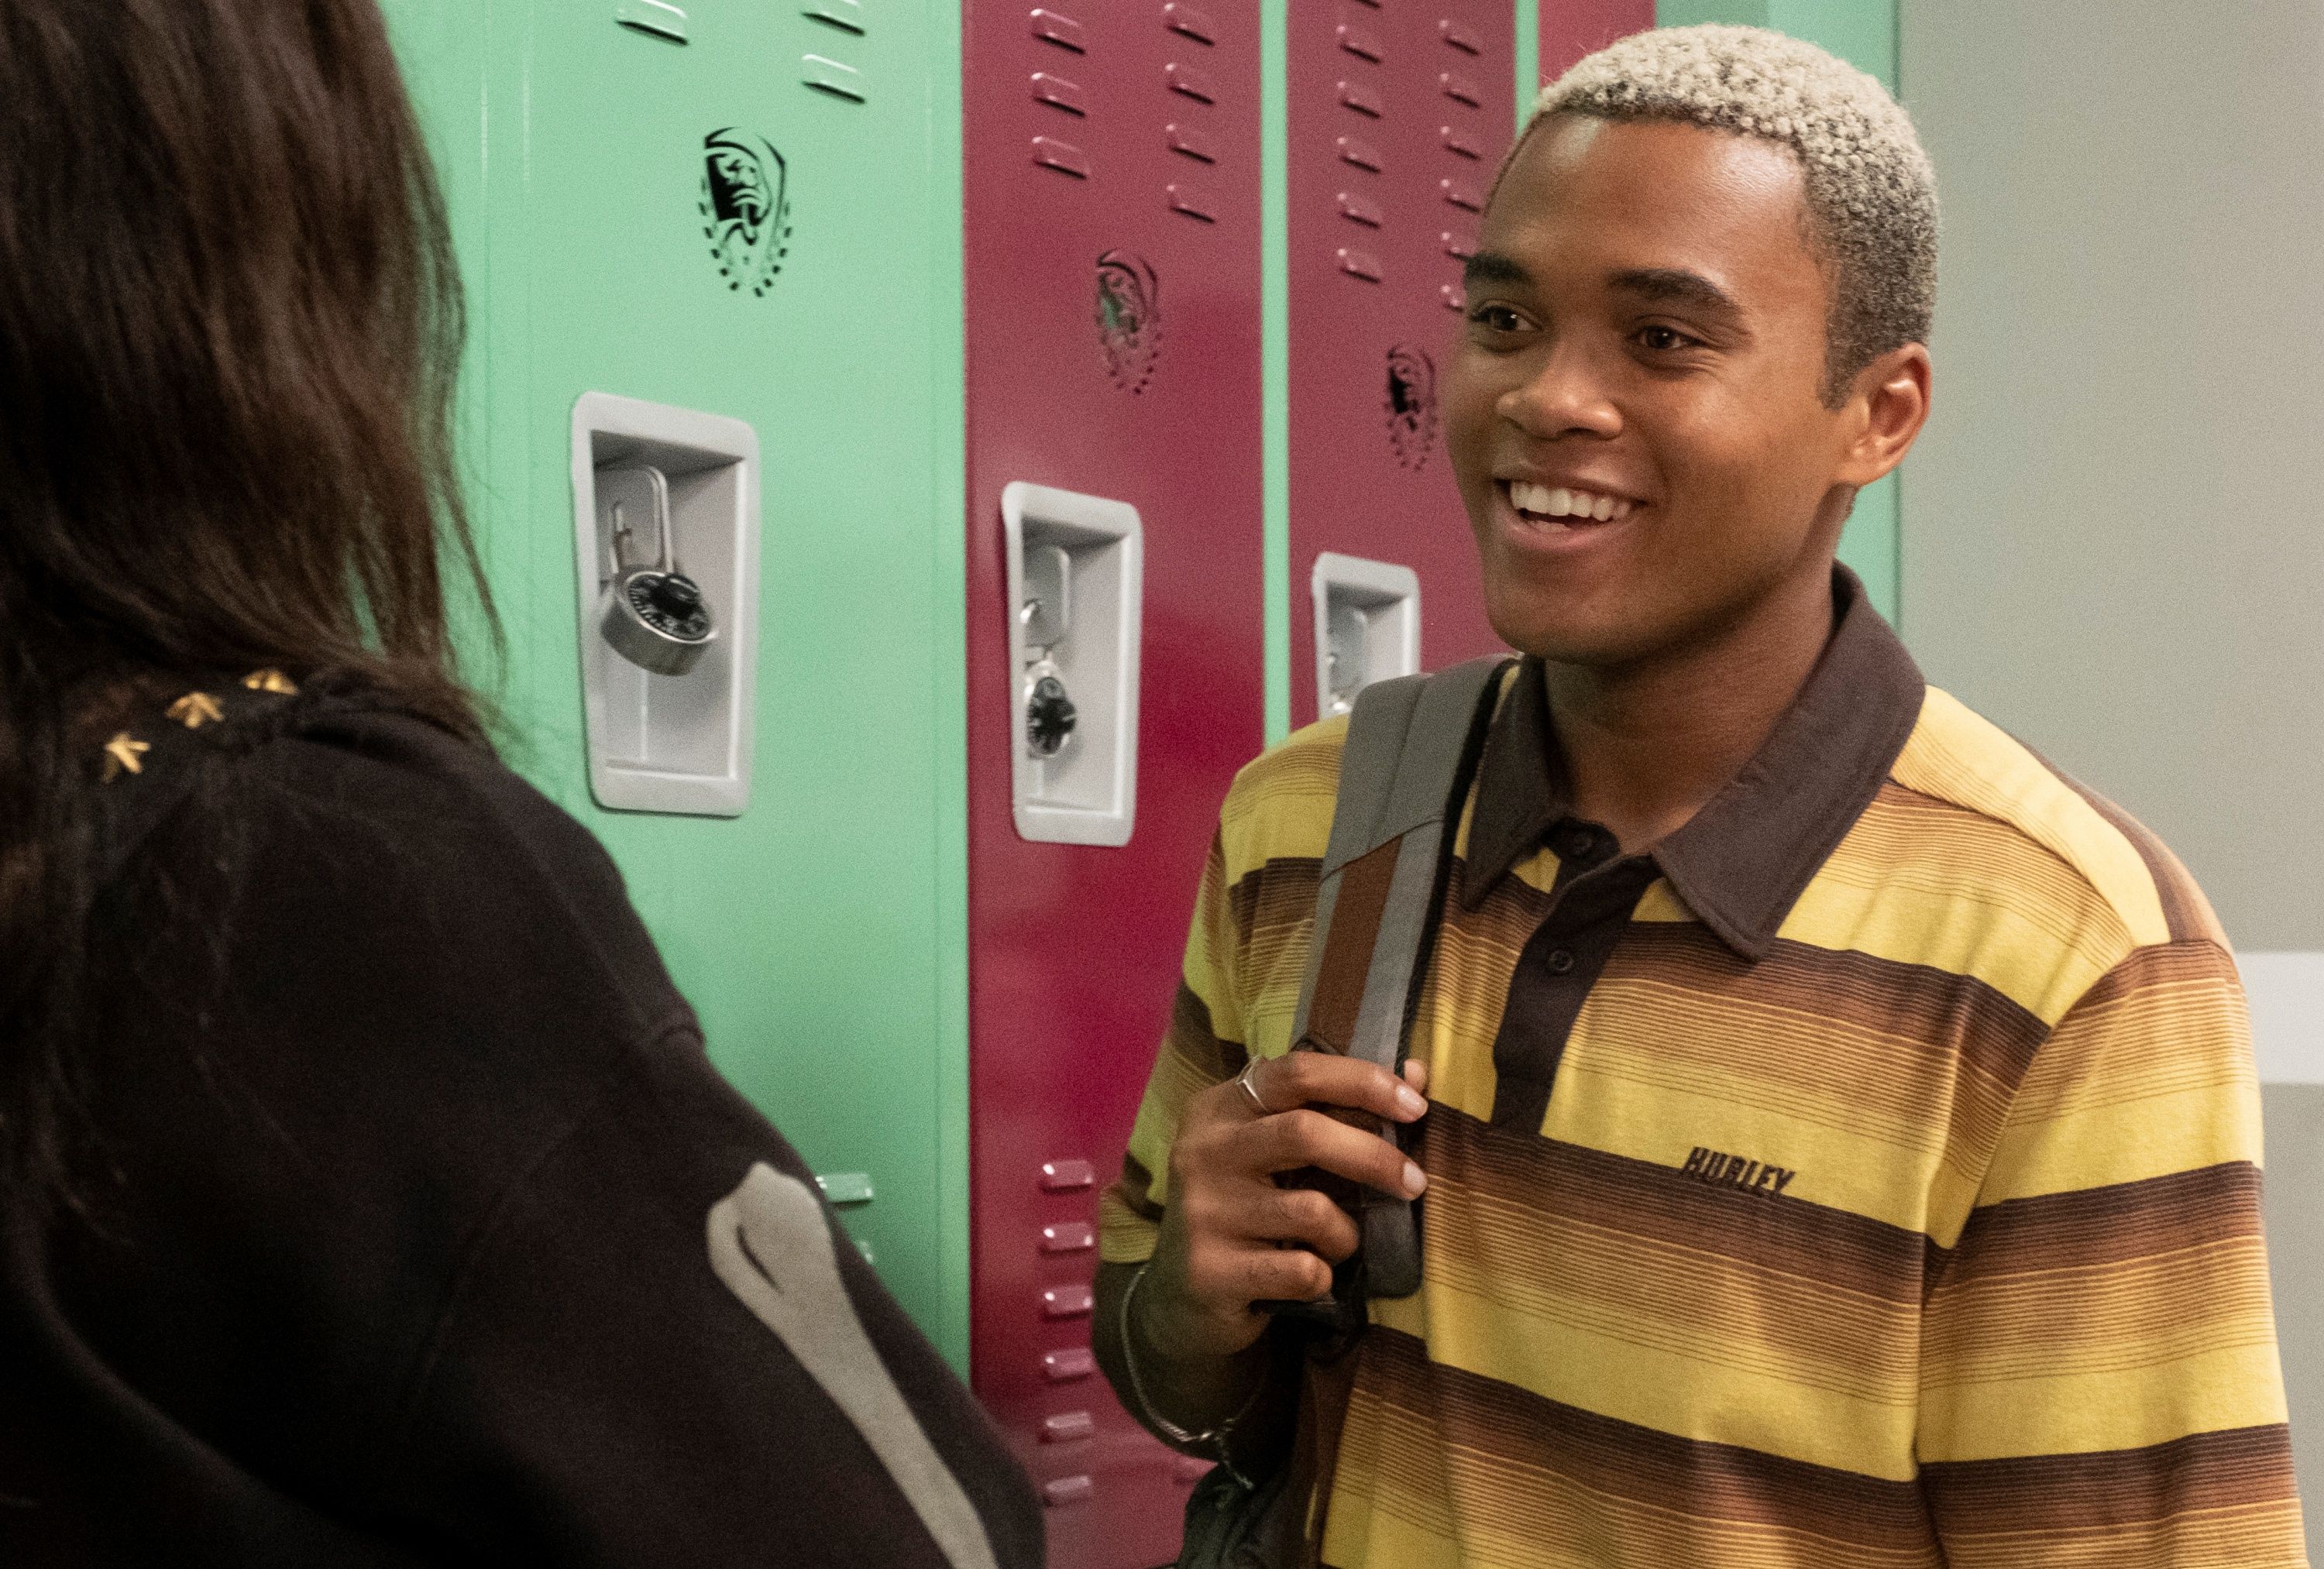 darby-and-the-dead-chosen-jacobs